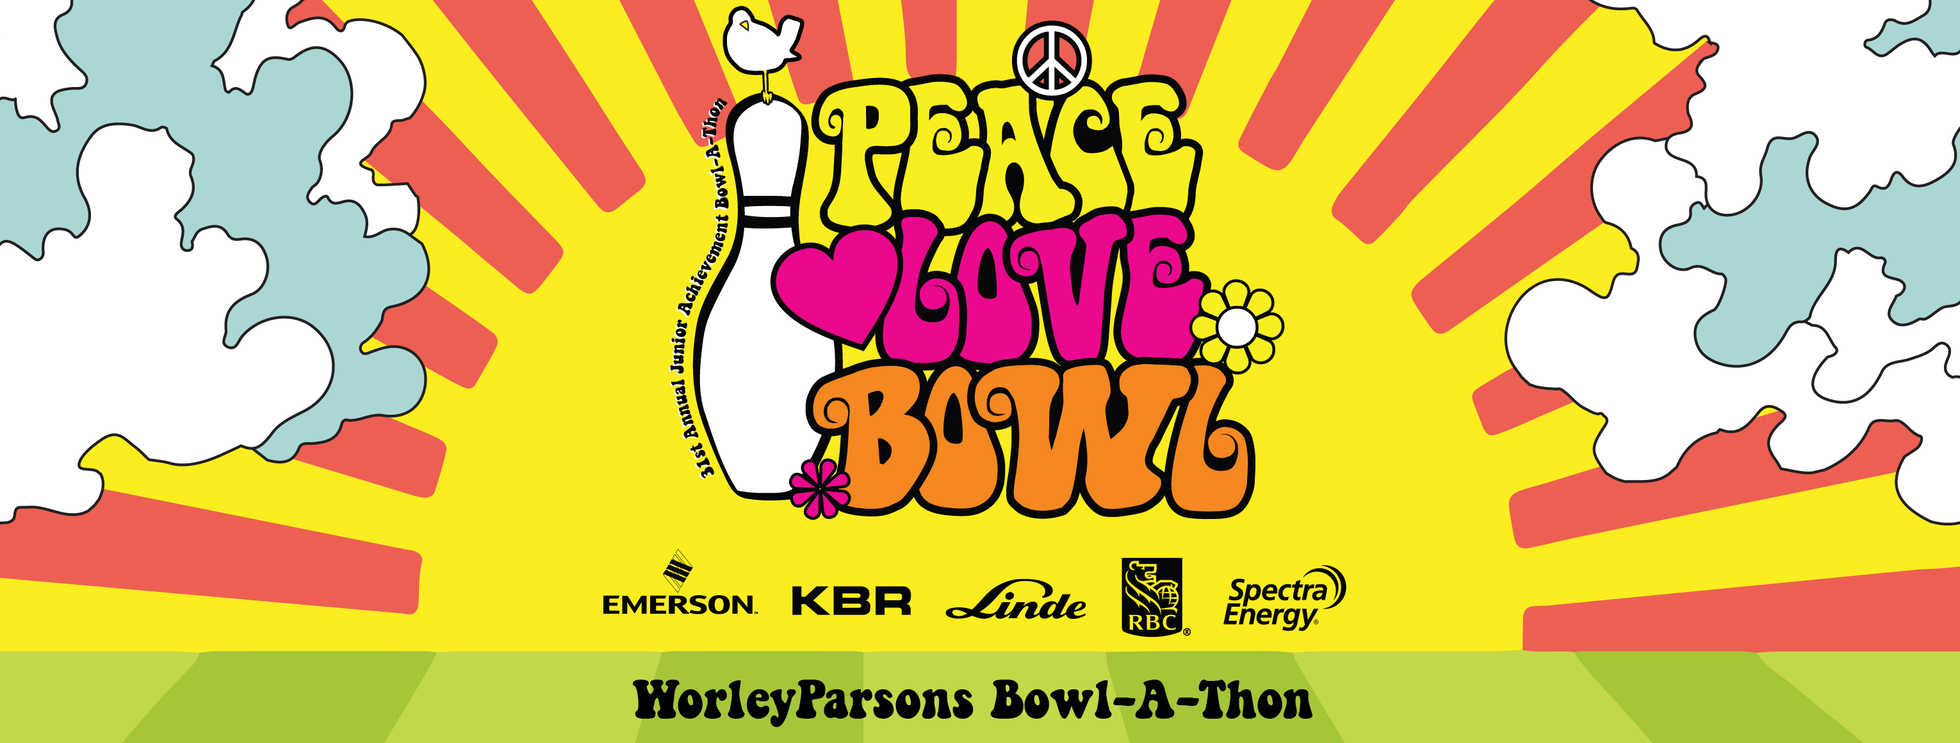 WorleyParsons Bowl-A-Thon